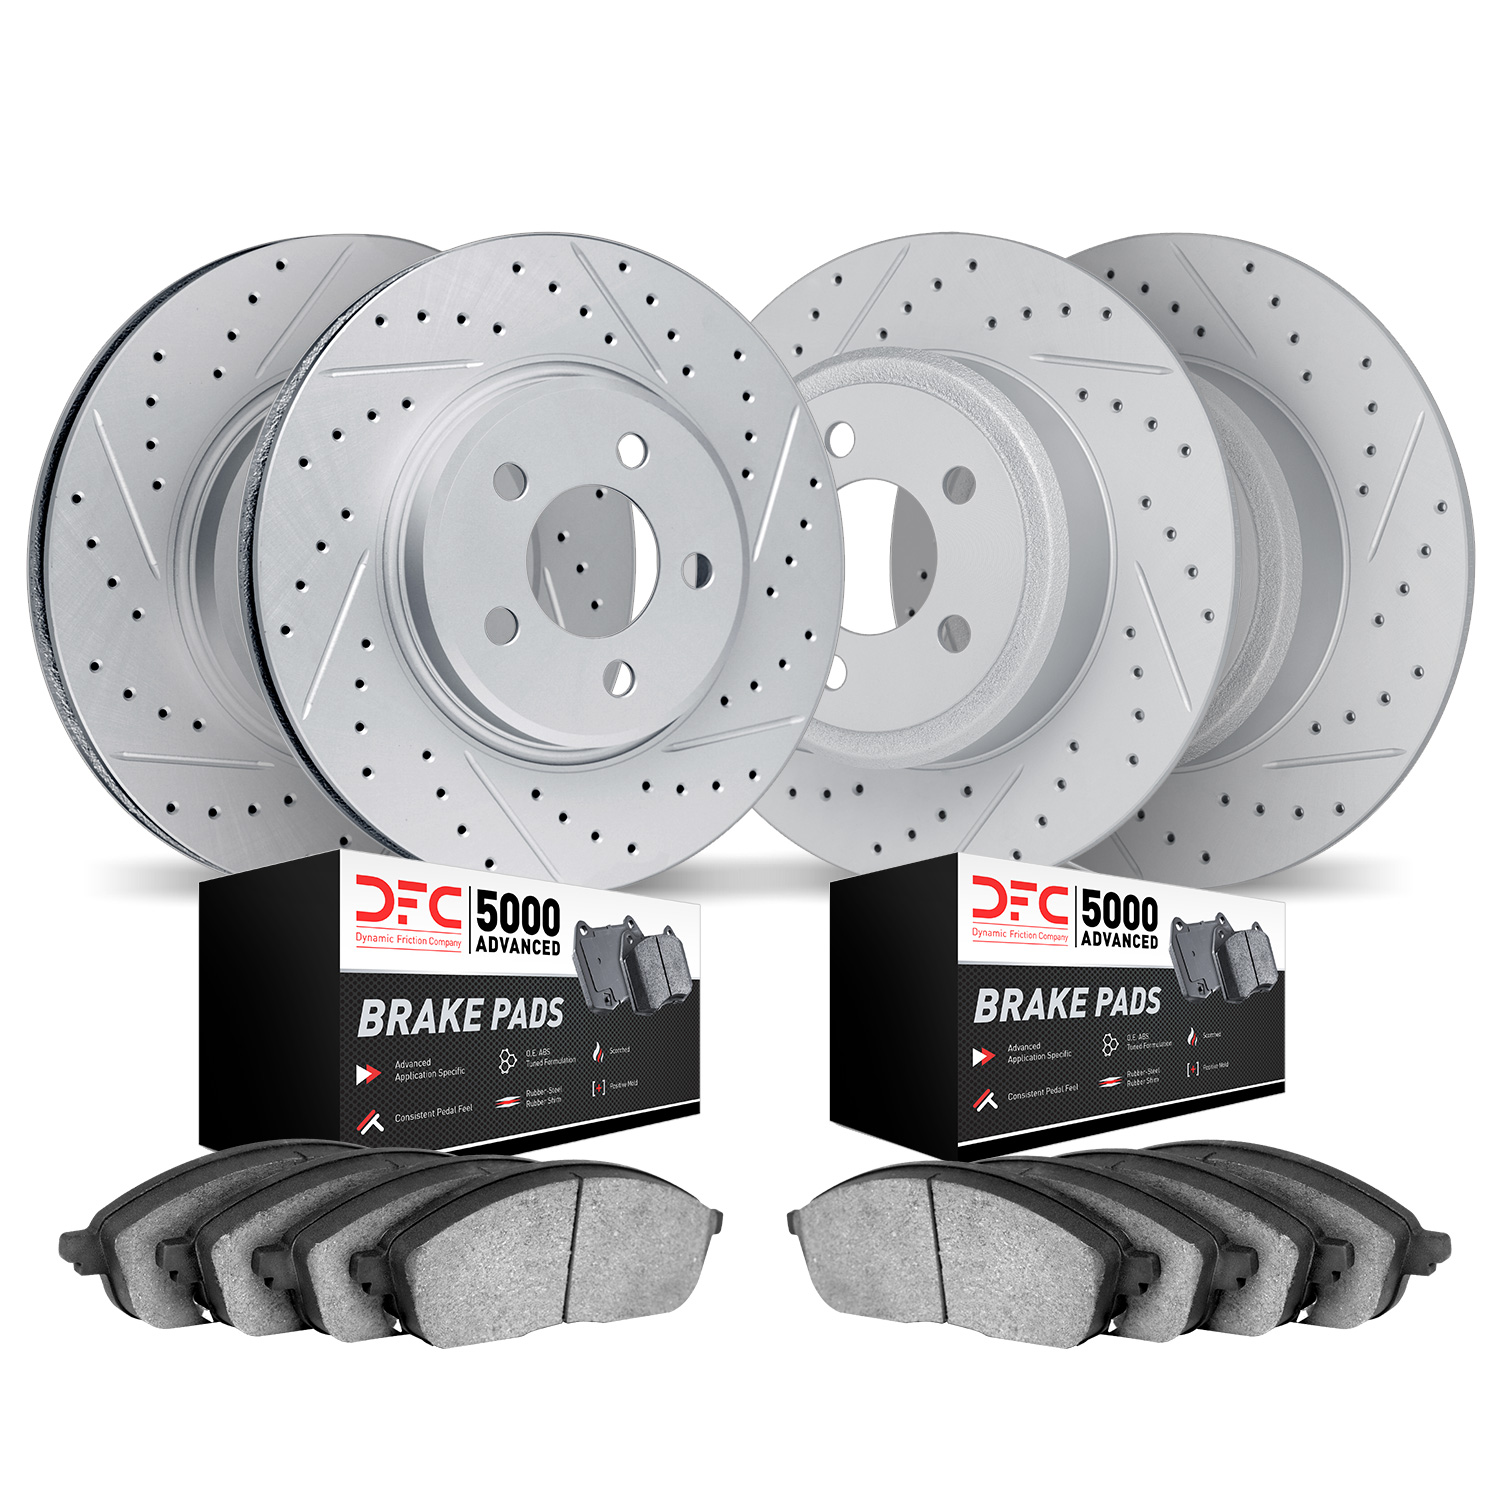 2504-45033 Geoperformance Drilled/Slotted Rotors w/5000 Advanced Brake Pads Kit, 2011-2017 GM, Position: Front and Rear